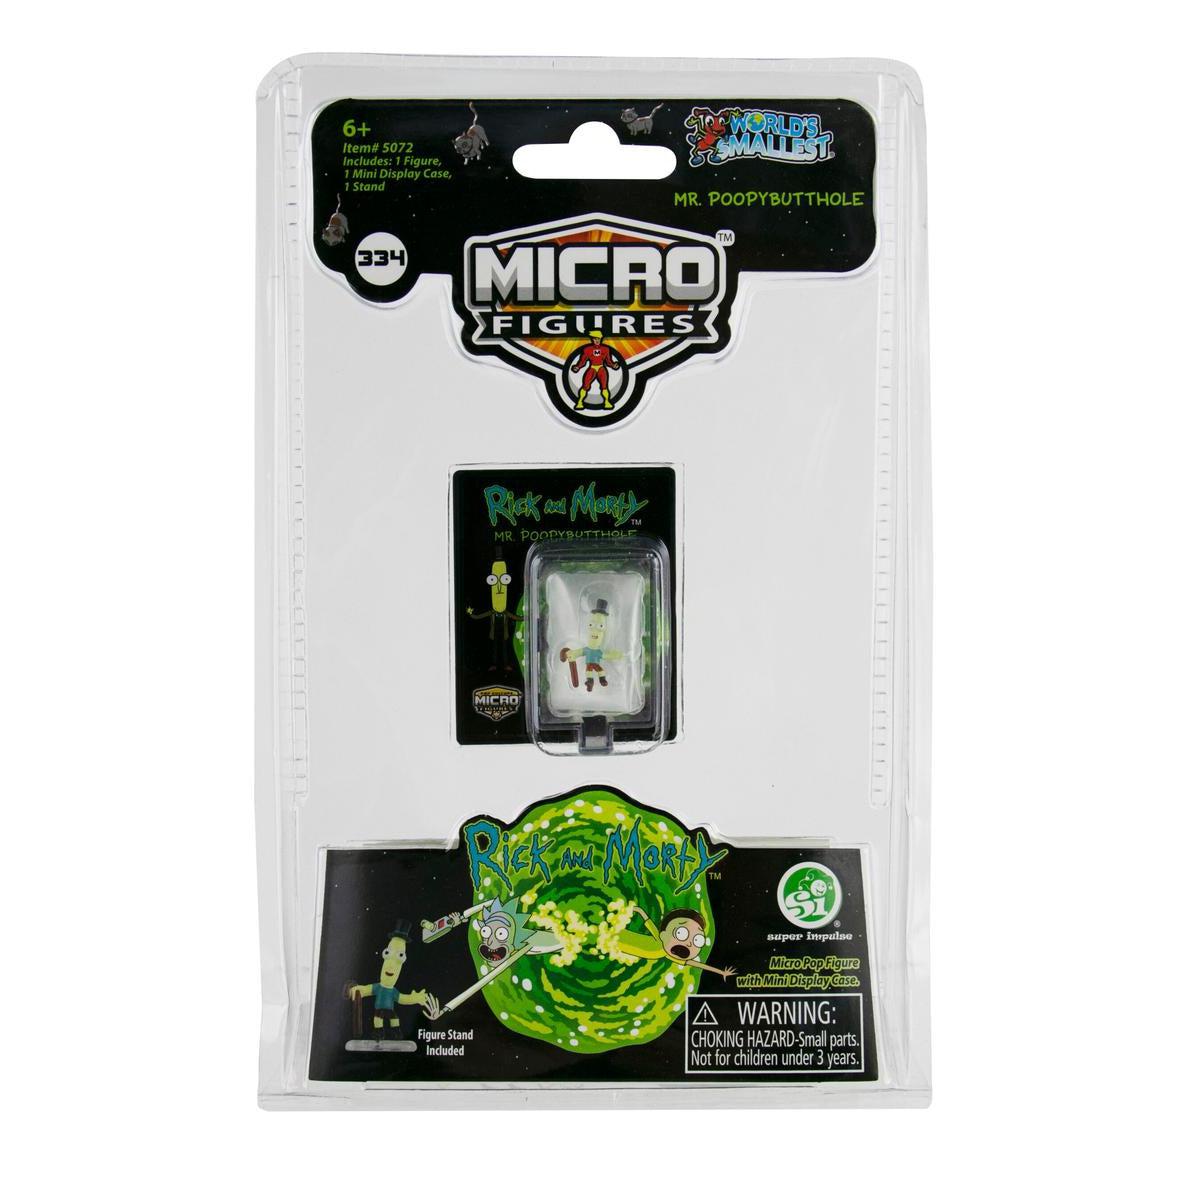 Super Impulse-World’s Smallest Rick and Morty Micro Figures-SUP5072-Legacy Toys